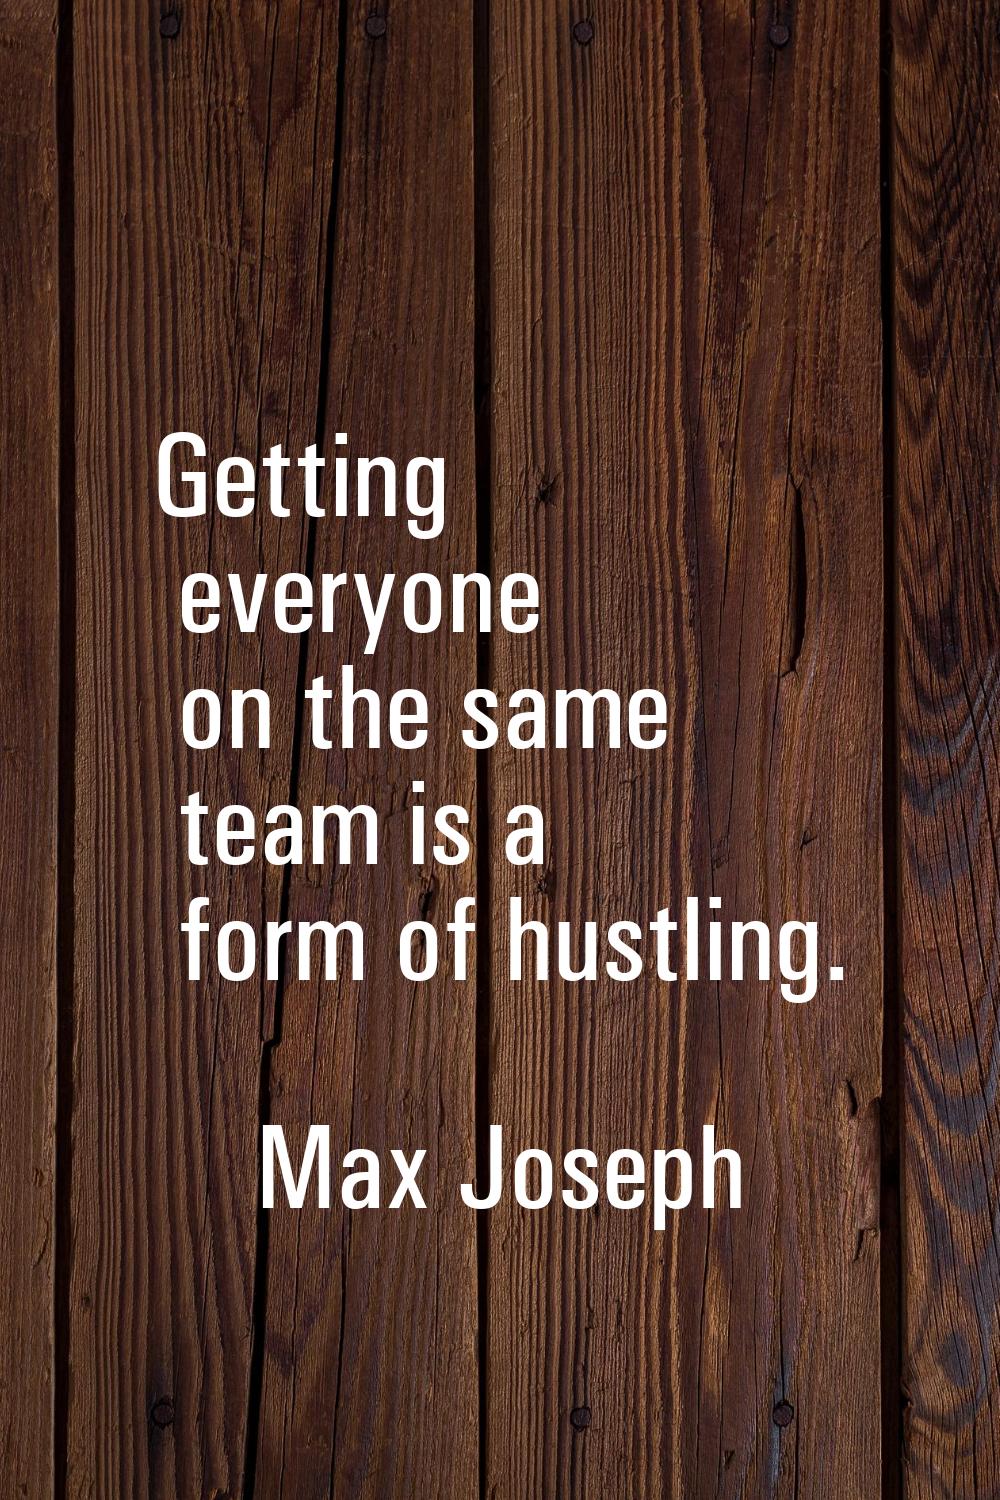 Getting everyone on the same team is a form of hustling.